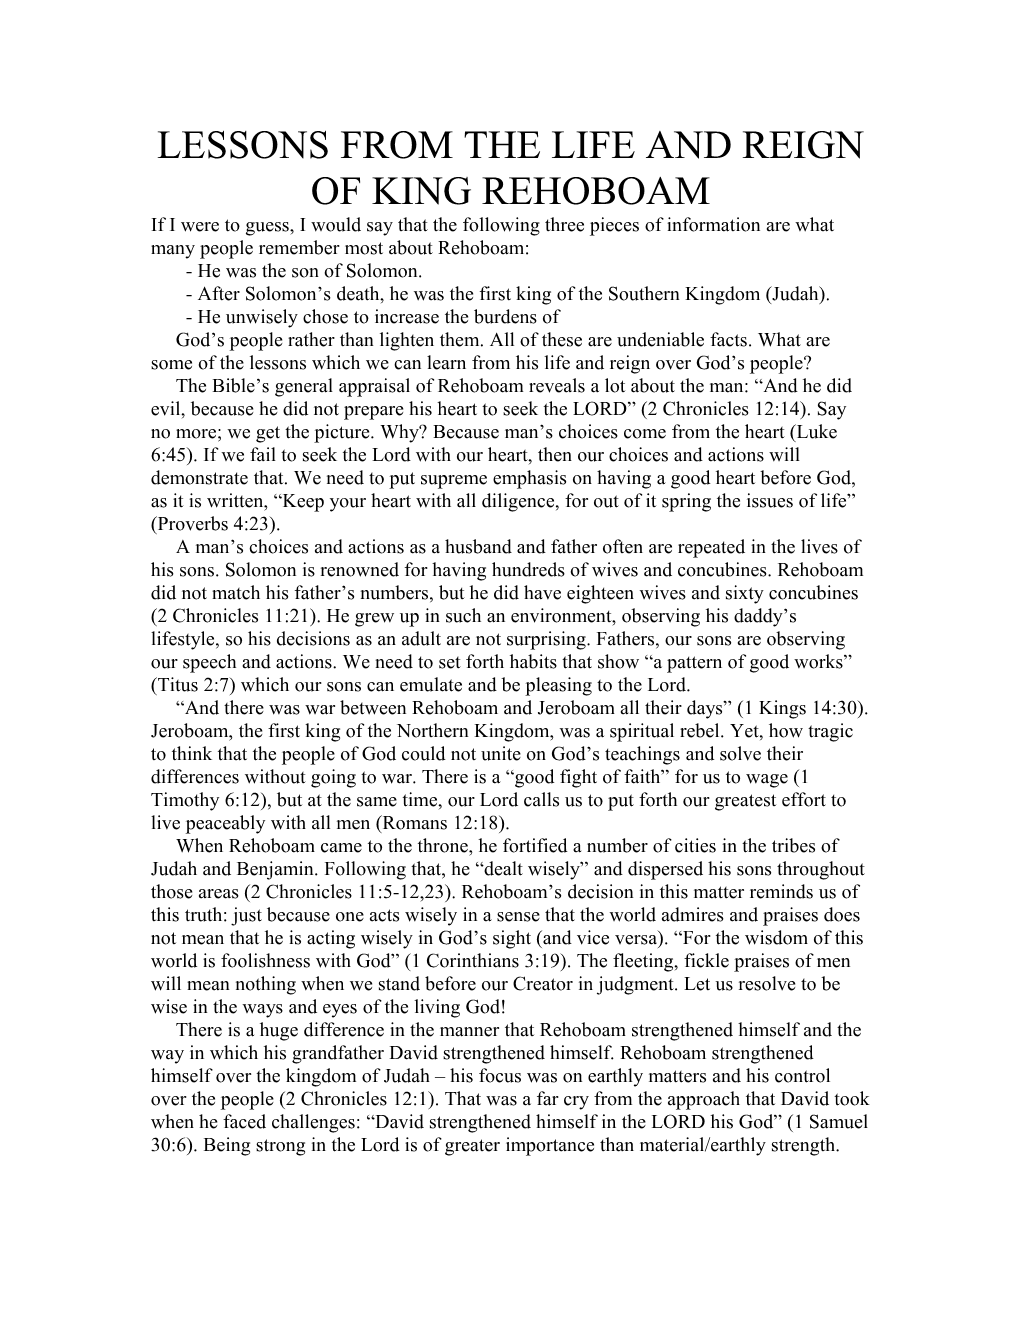 Lessons from the Life and Reign of King Rehoboam